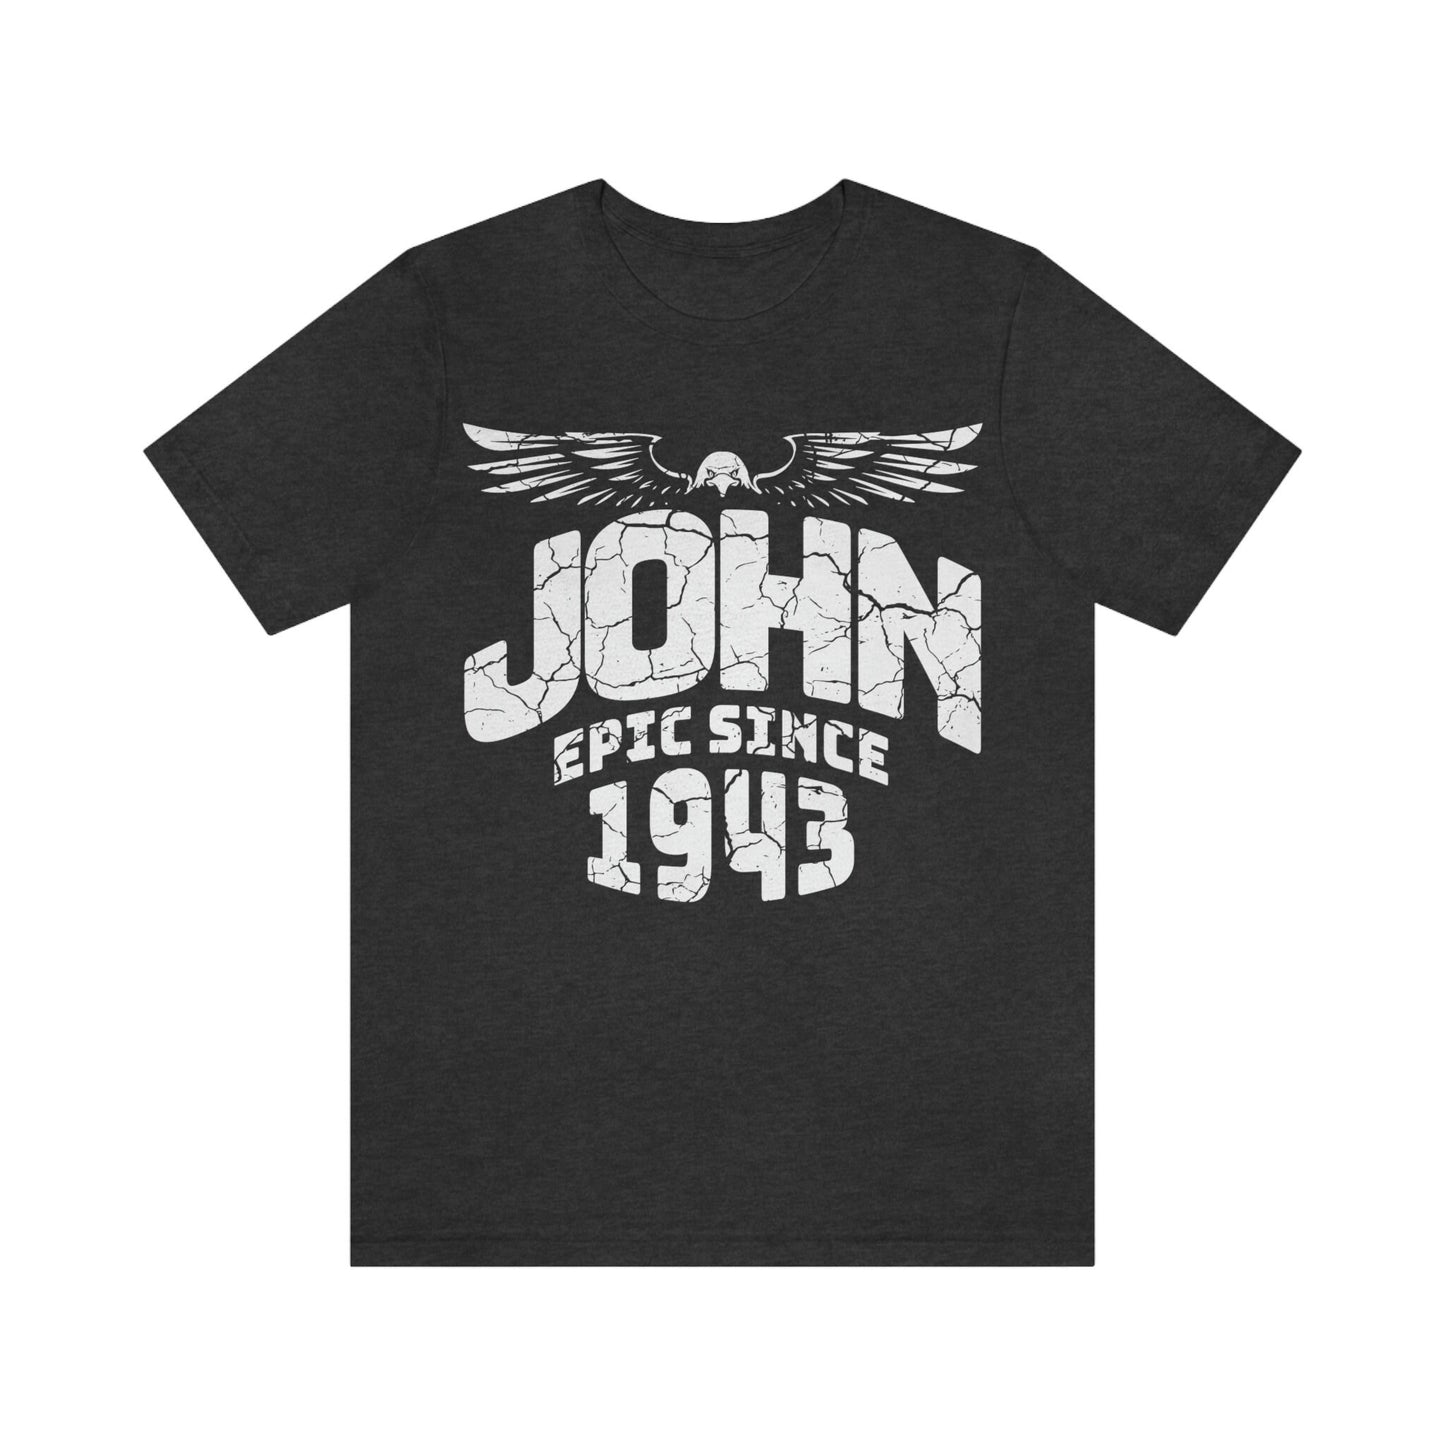 Epic Since 1943 birthday shirt for Husband or Dad,  Personalized name t-shirt for men or brother